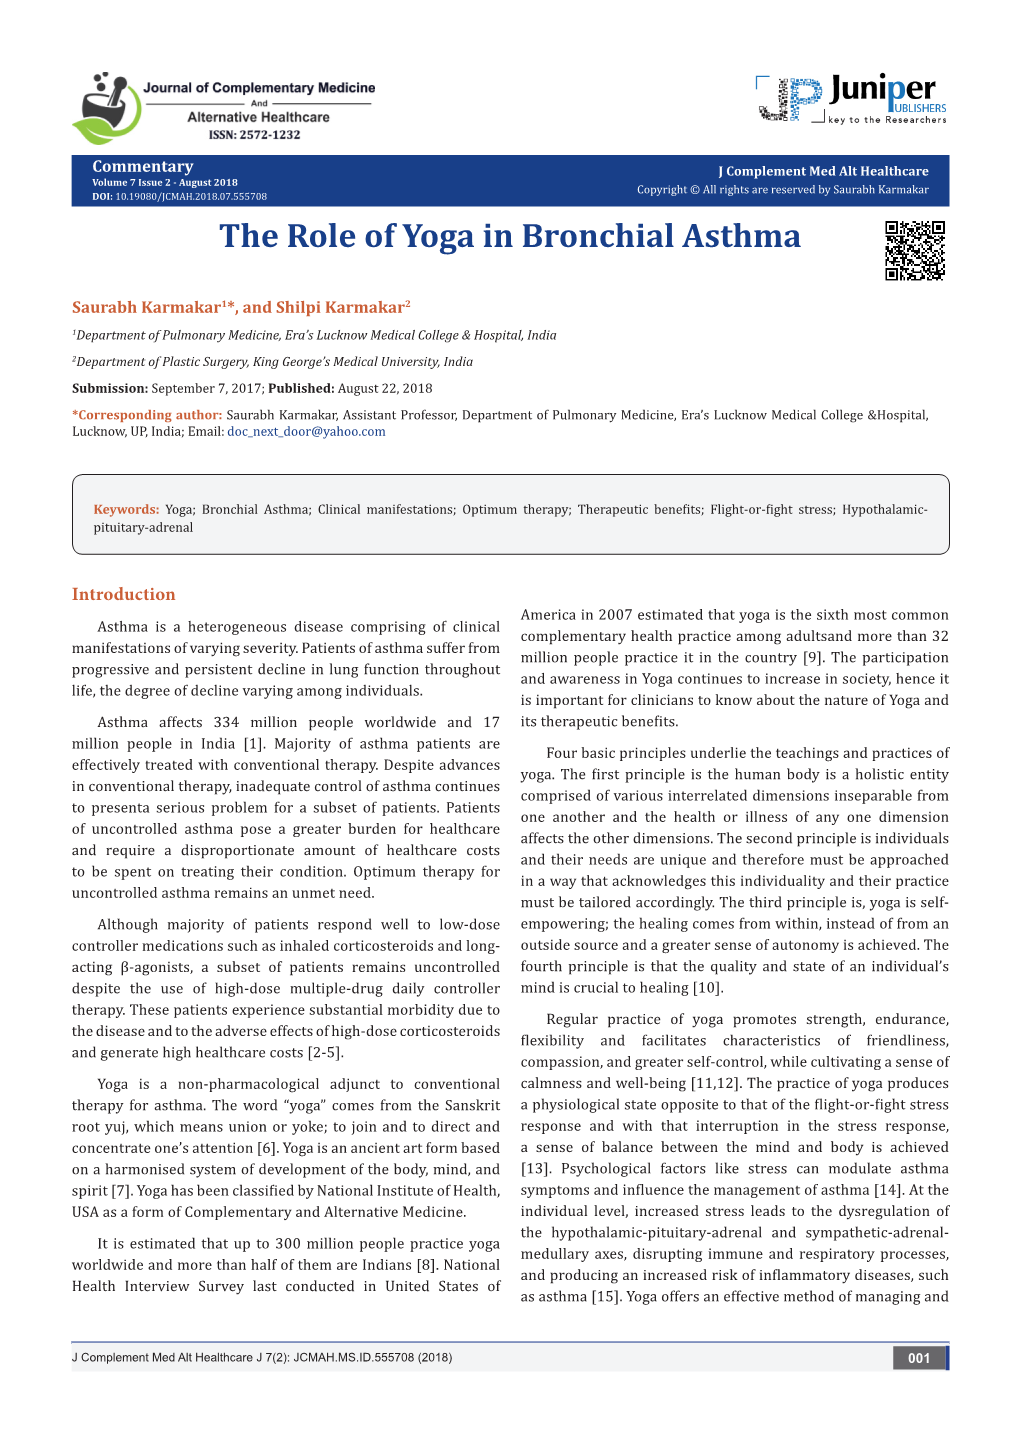 The Role of Yoga in Bronchial Asthma